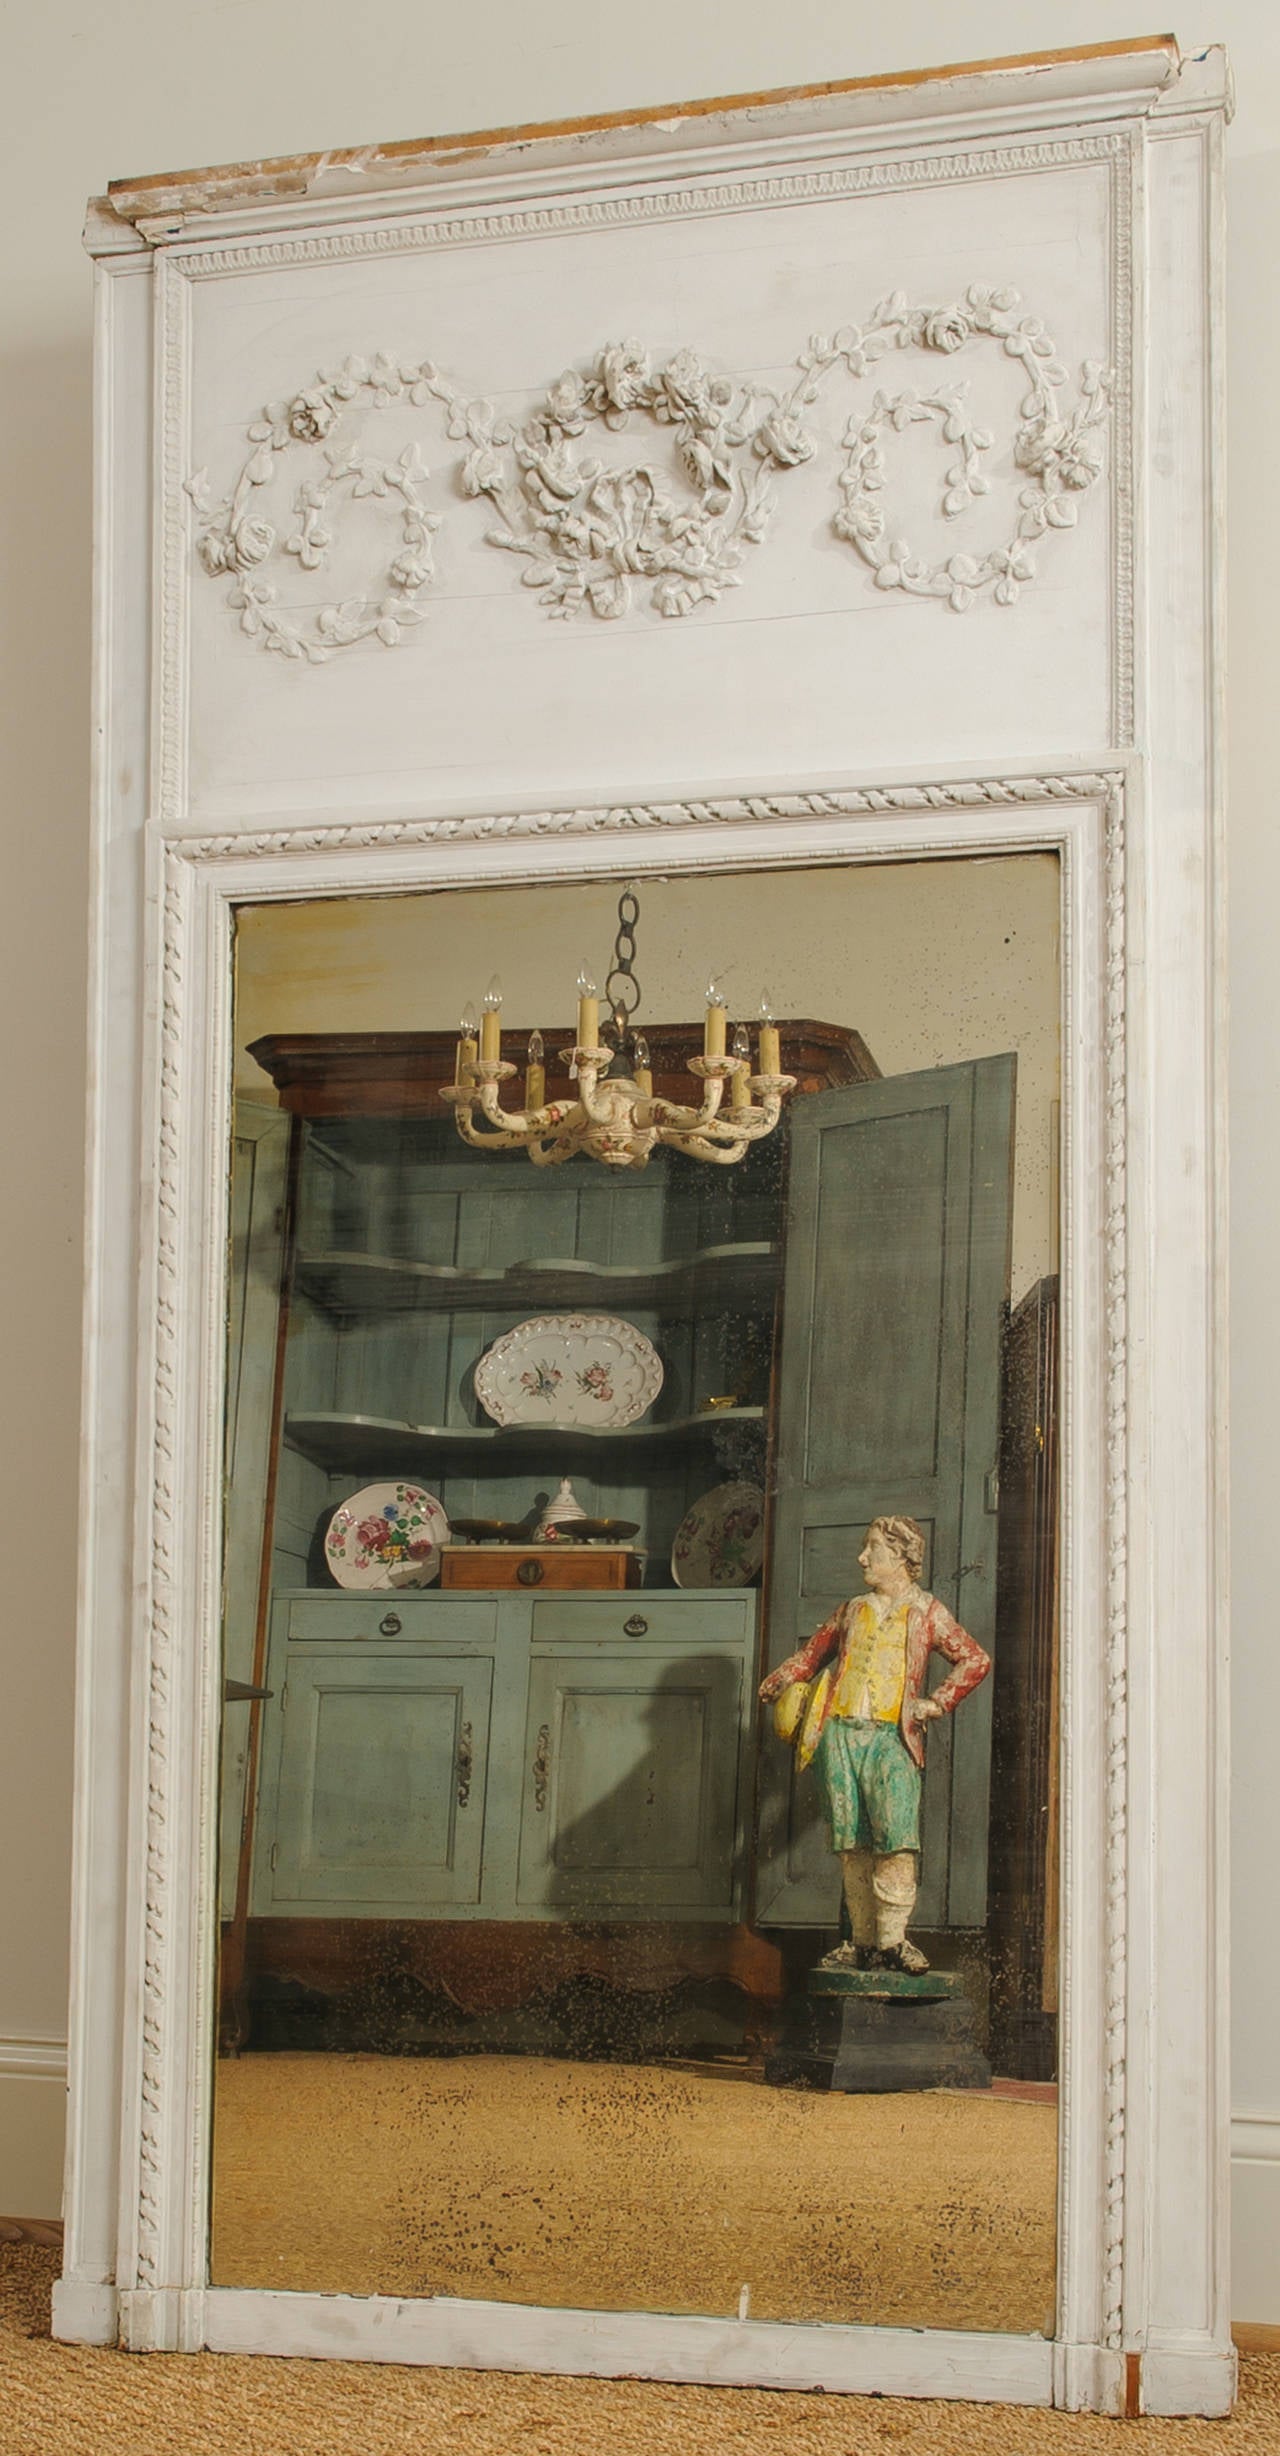 This Louis XVI trumeau mirror is one of two mirrors that are from the same paneled room, in a chateau in Southwest France. They have the same ring garland and bow applique´ and moldings, but differ slightly in size. This decorative panel is framed